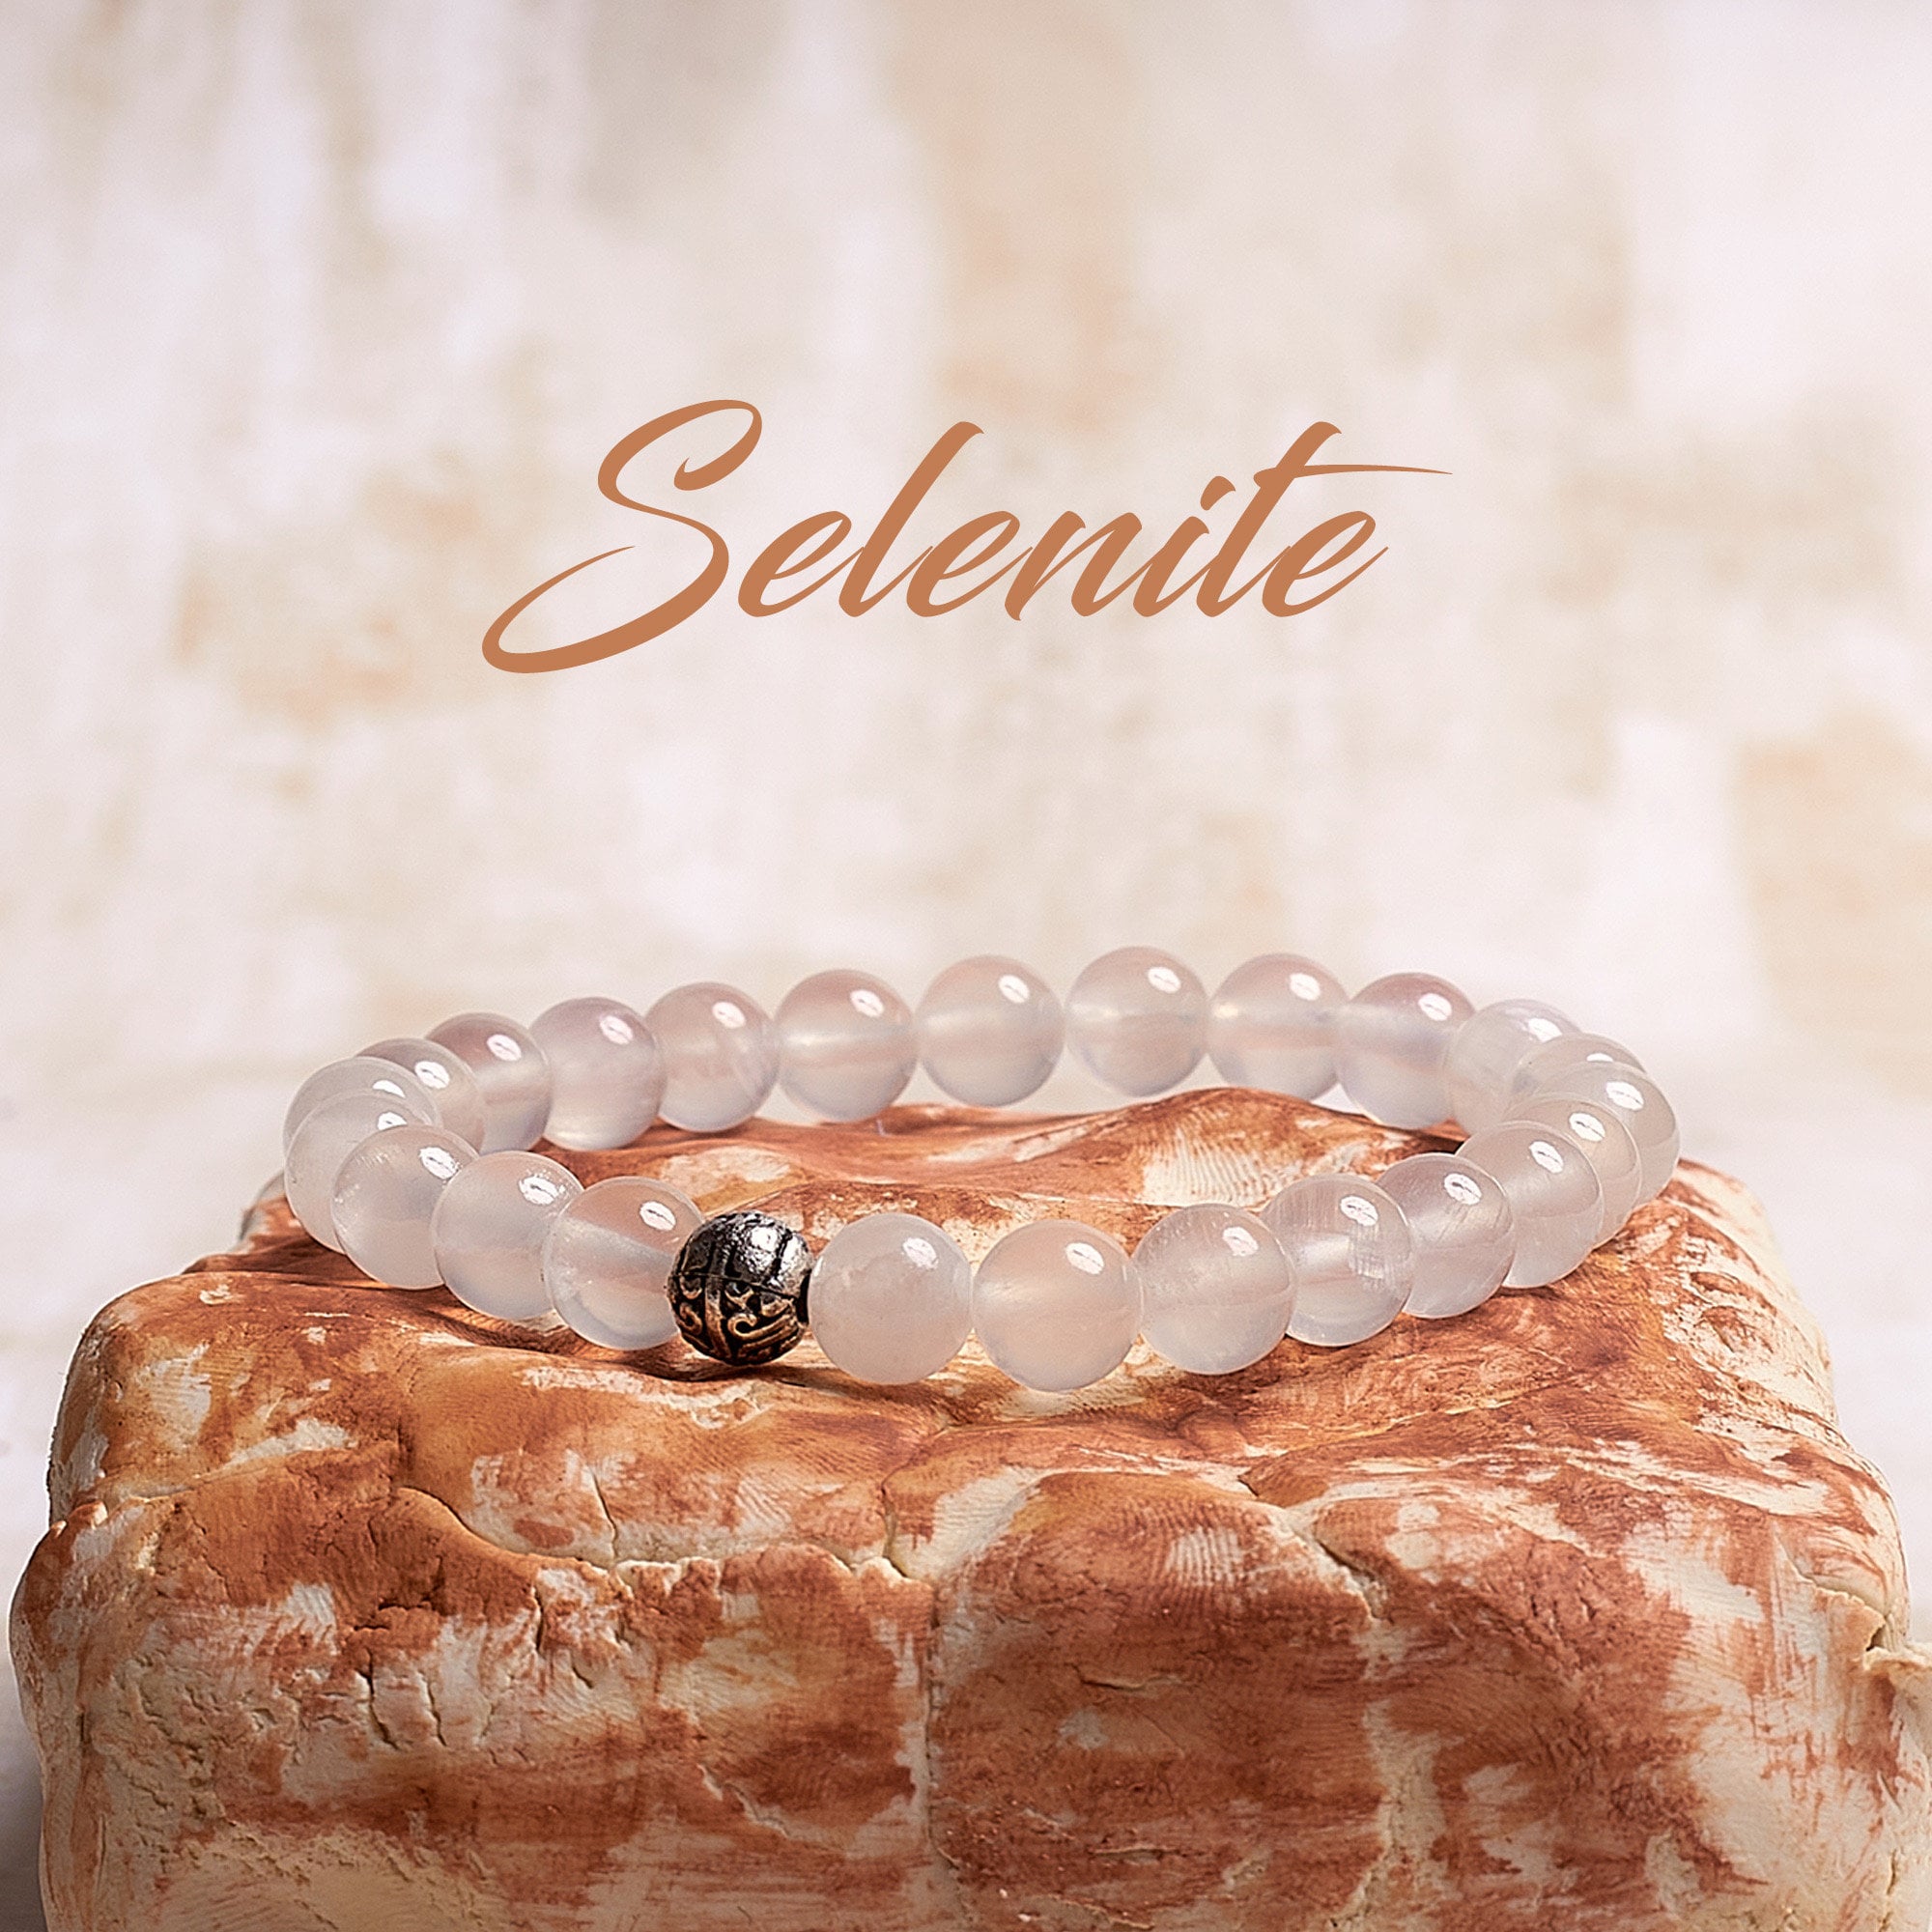 Selenite Uses and Benefits For Protection and Cleansing | Village Rock Shop